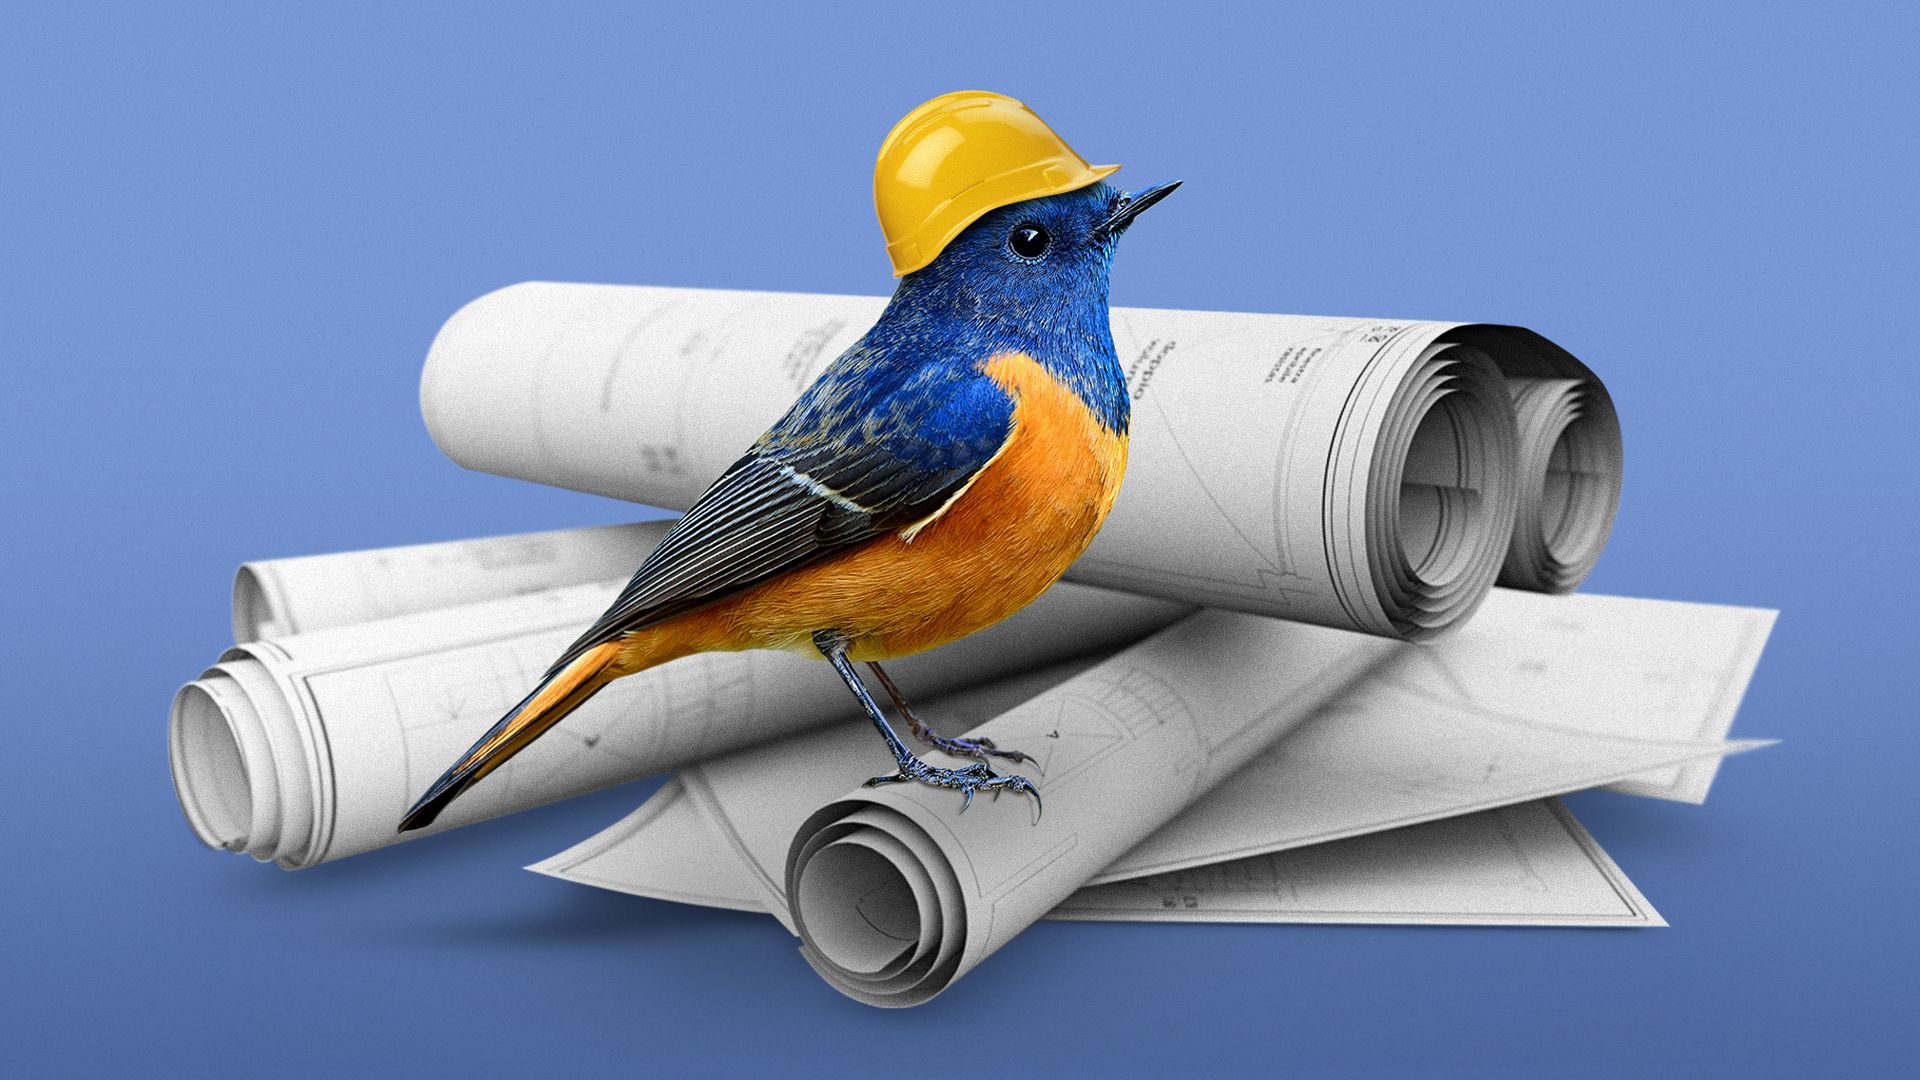 Illustration of a bird with a hard hat on standing atop rolls of blueprints